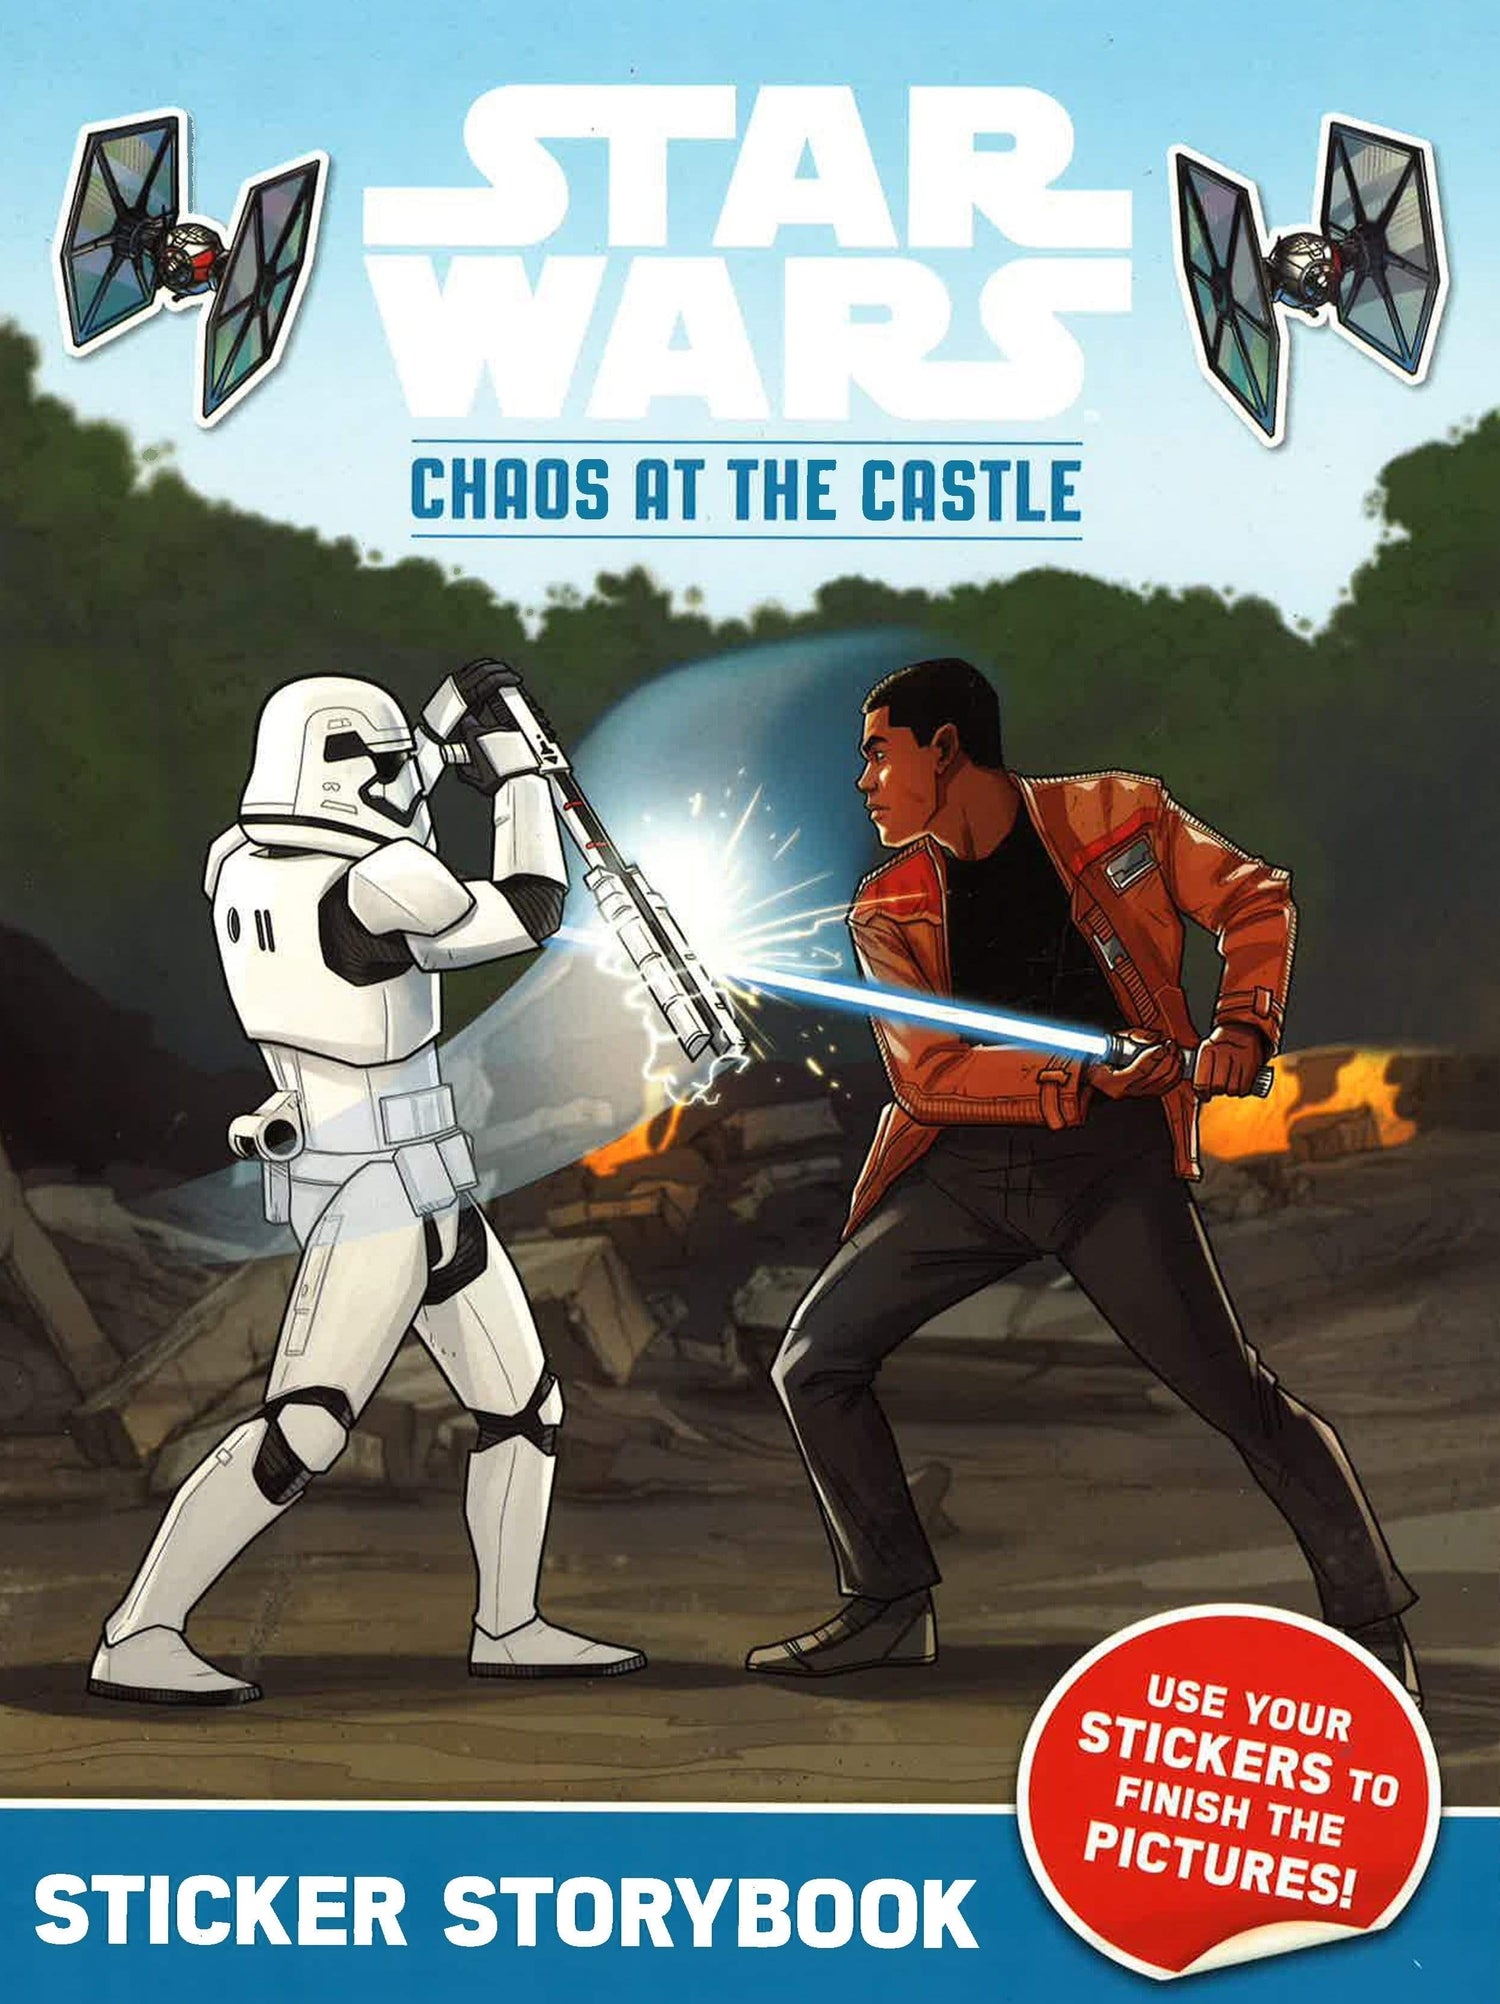 Star Wars: Chaos at the Castle Sticker Storybook